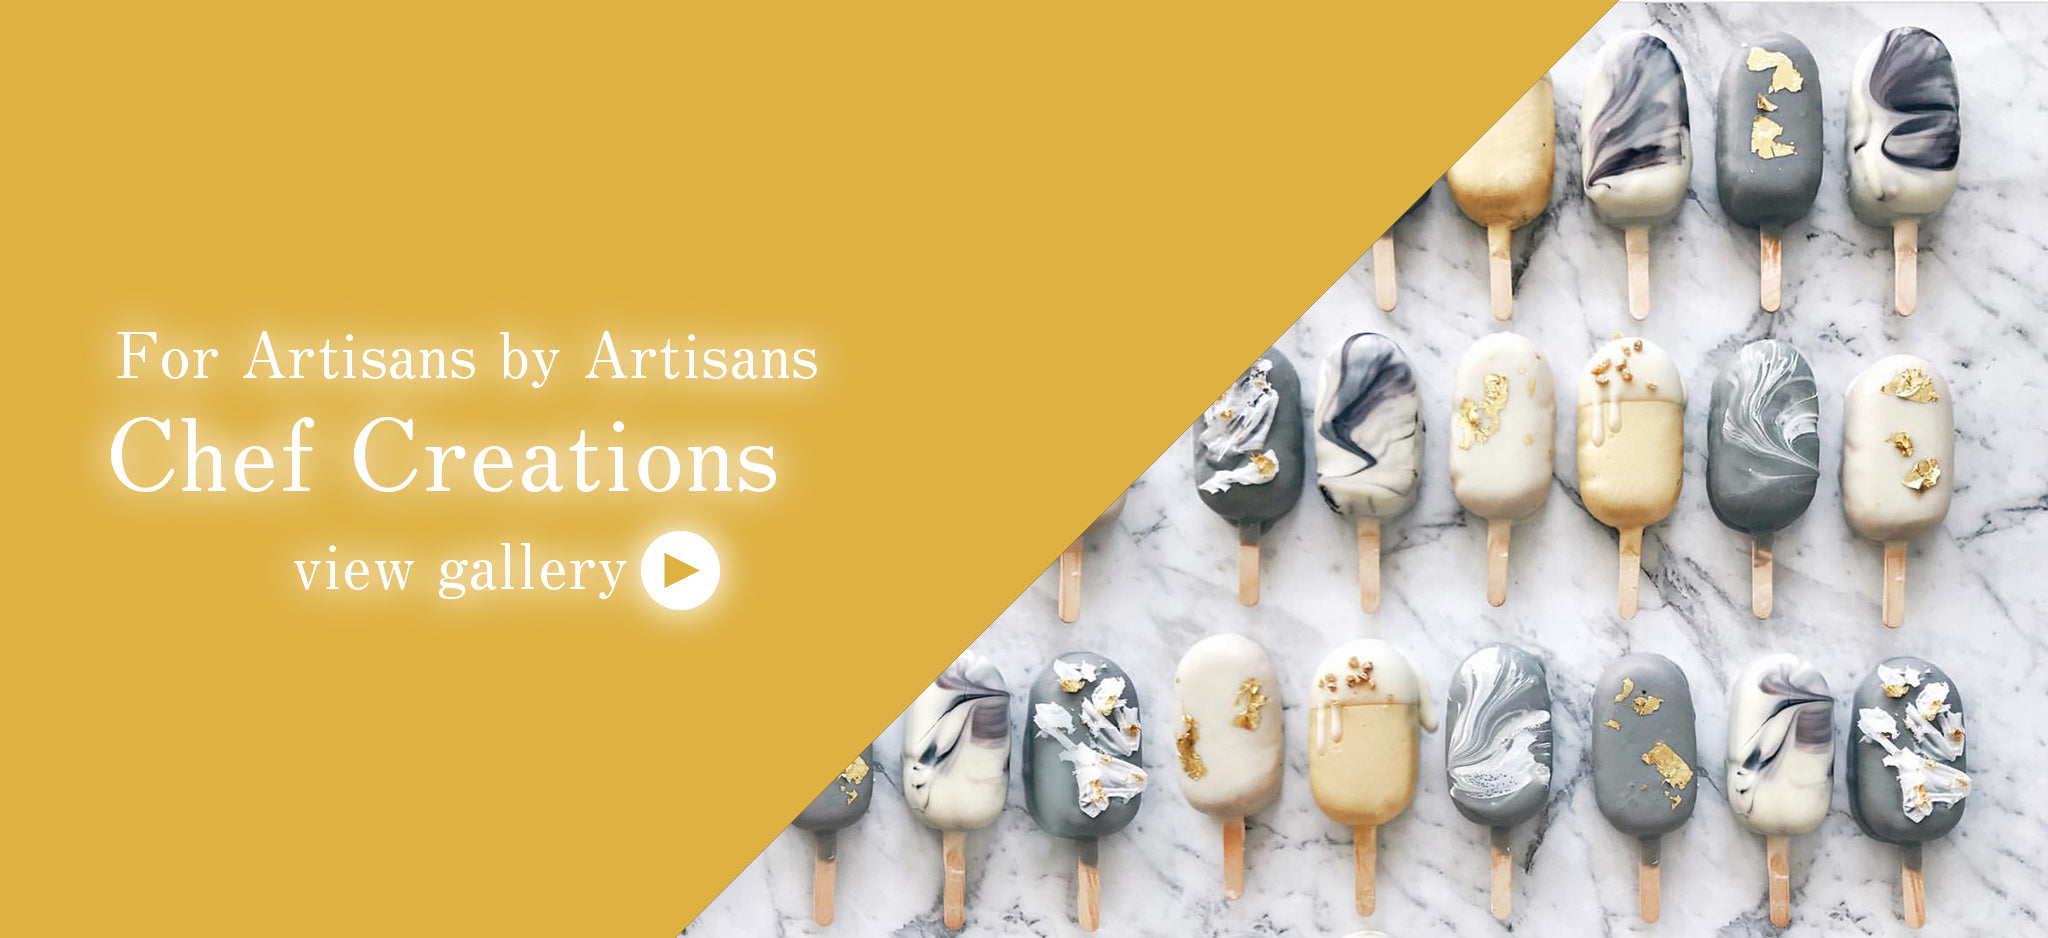 For Artisans By Artisans - Chef Creations - view gallery